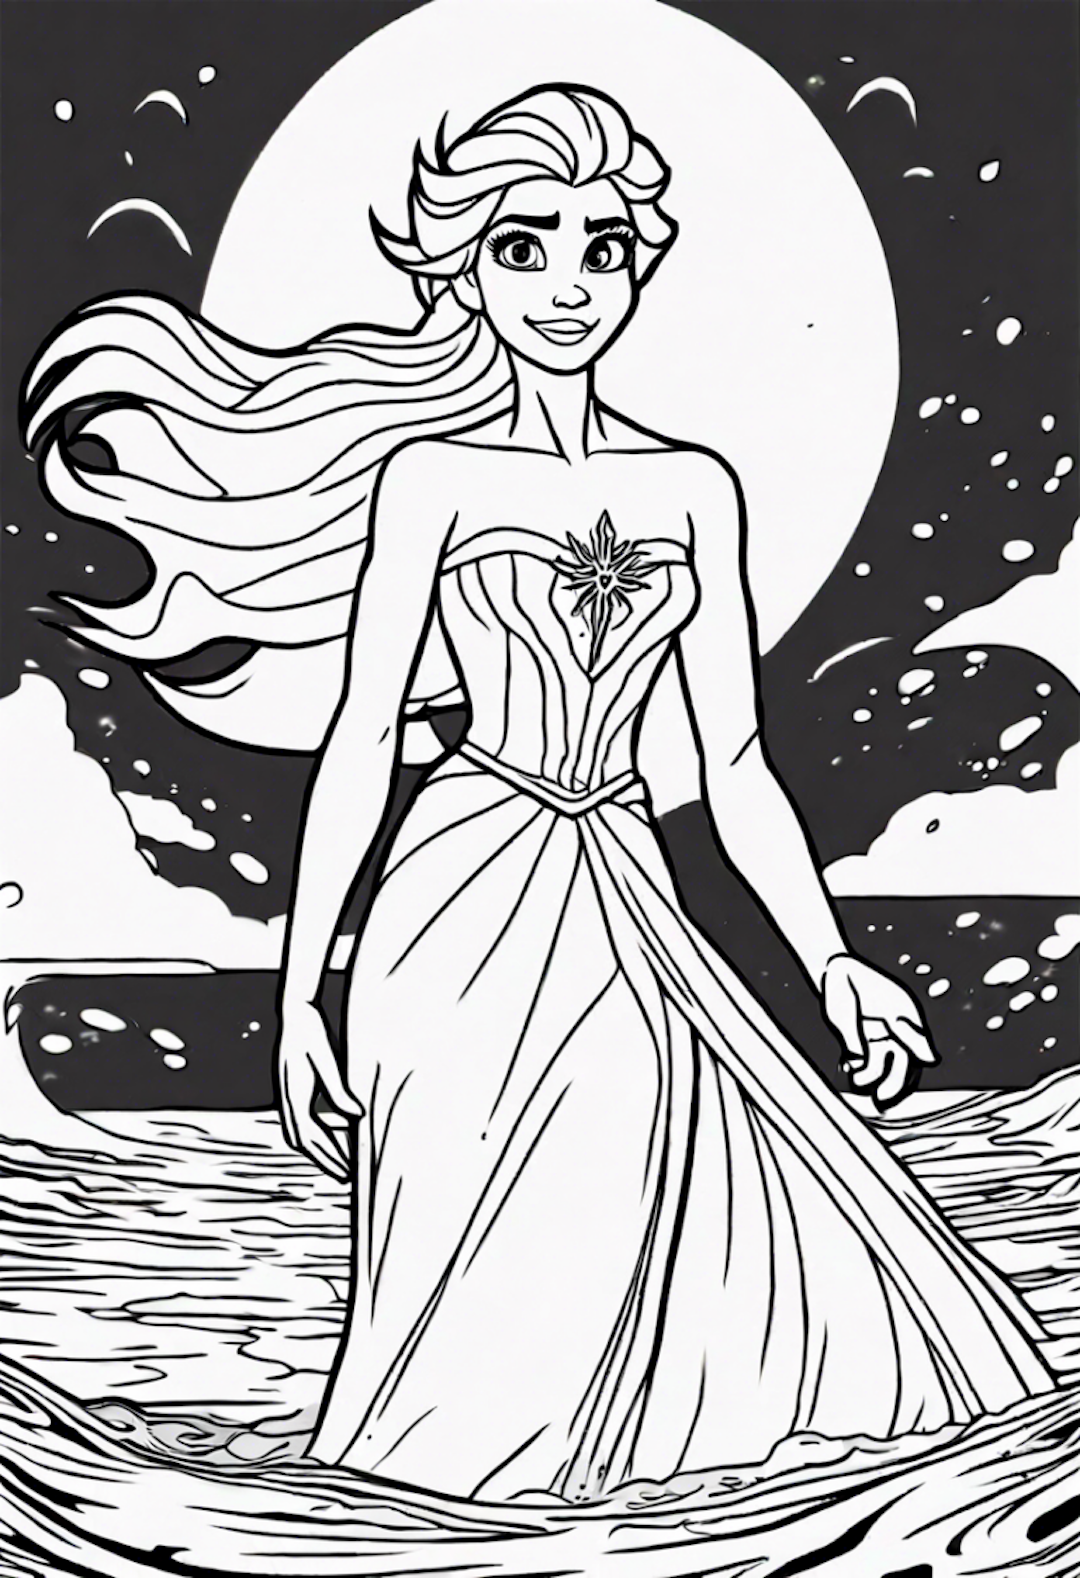 Elsa Walking on Water under a Full Moon coloring pages